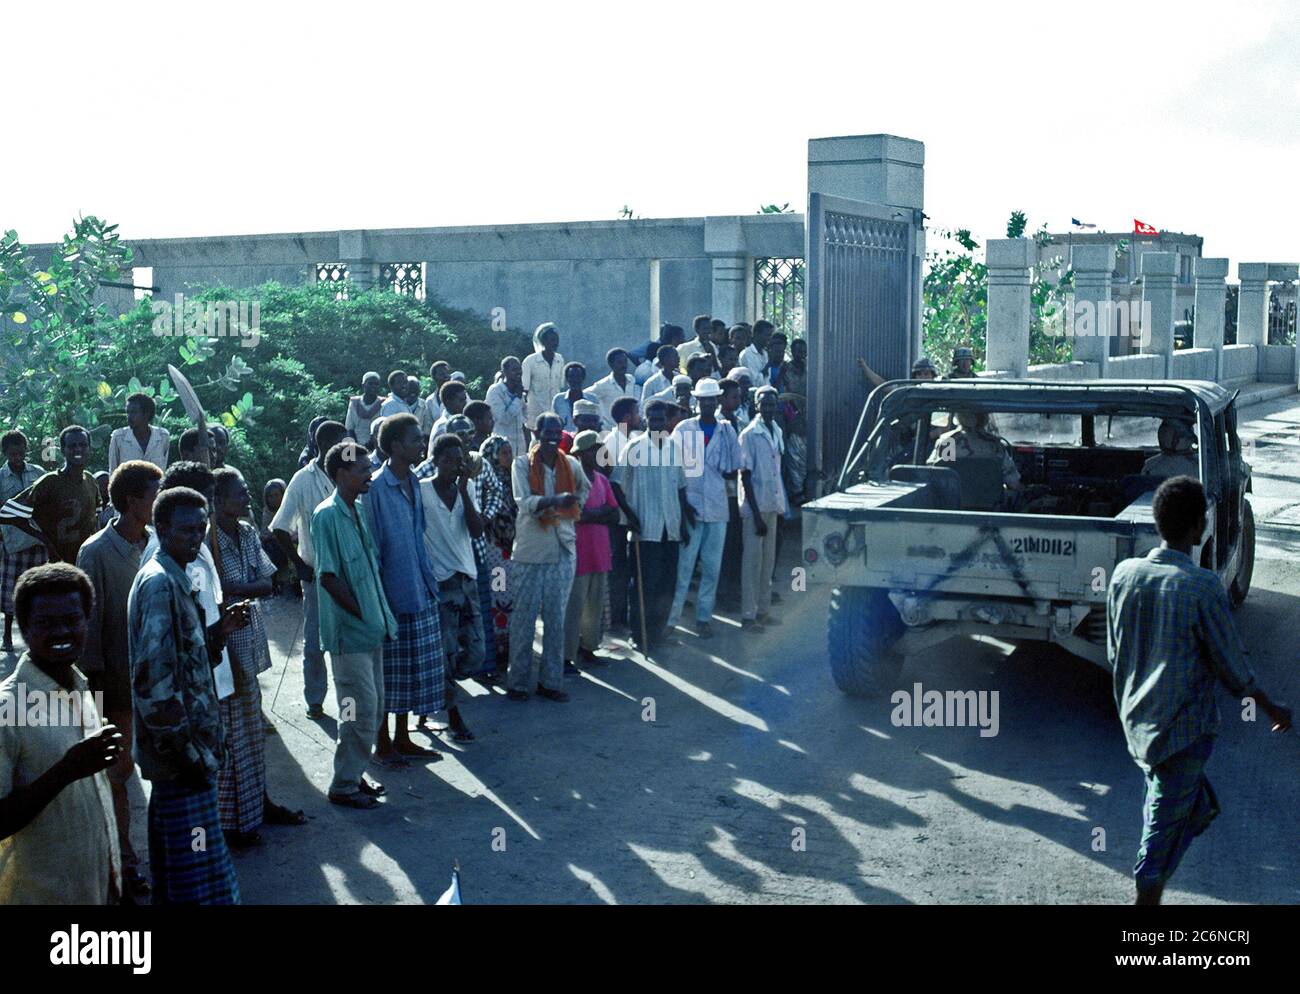 1992 - Somalis watch as an M-998 series vehicle enters the Joint Task Force Somalia headquarters.  The headquarters was established at the former U.S. Embassy compound during the multinational relief effort Operation Restore Hope. Stock Photo